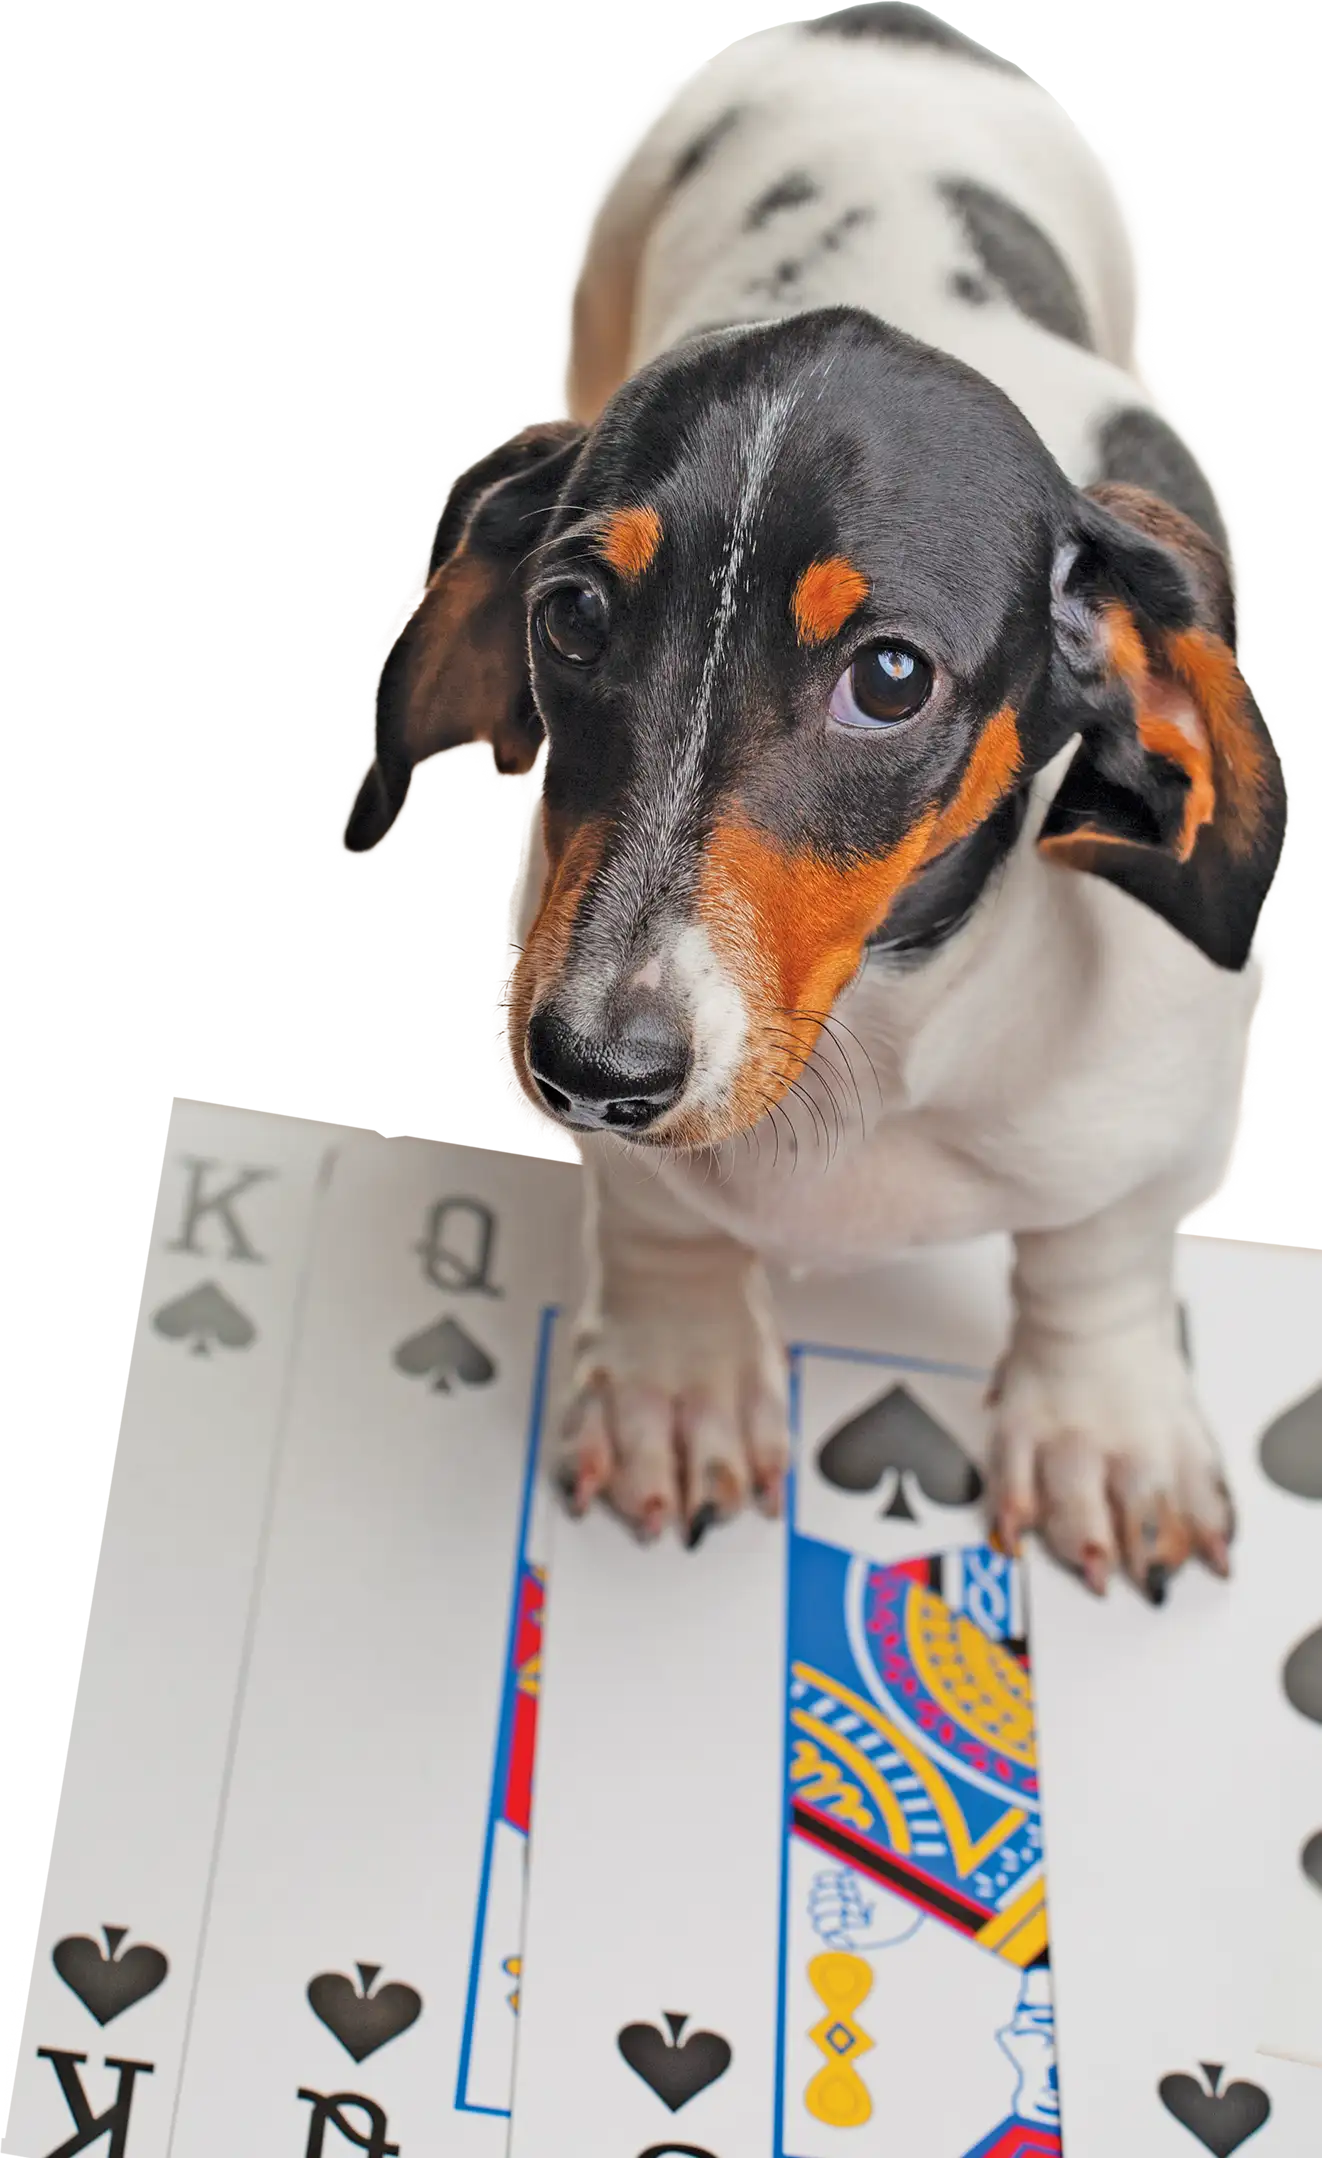 Dog standing on different playing cards